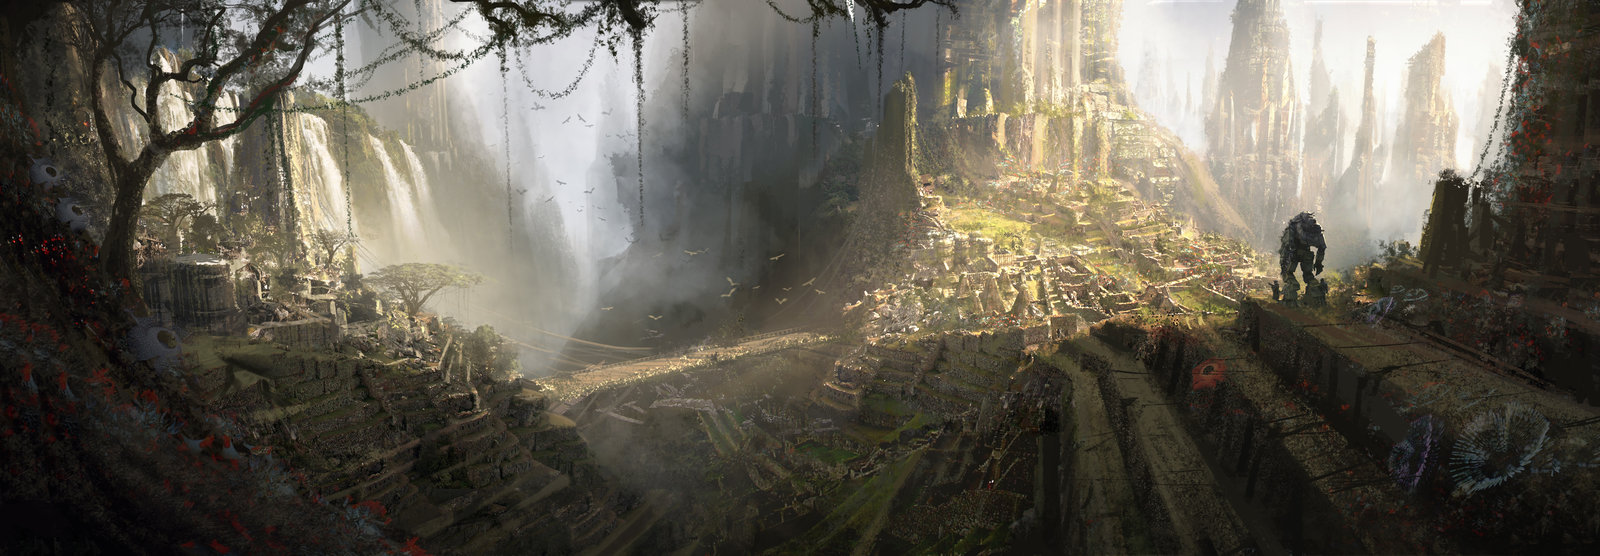 The Best Video Game Concept Art Of 2014*